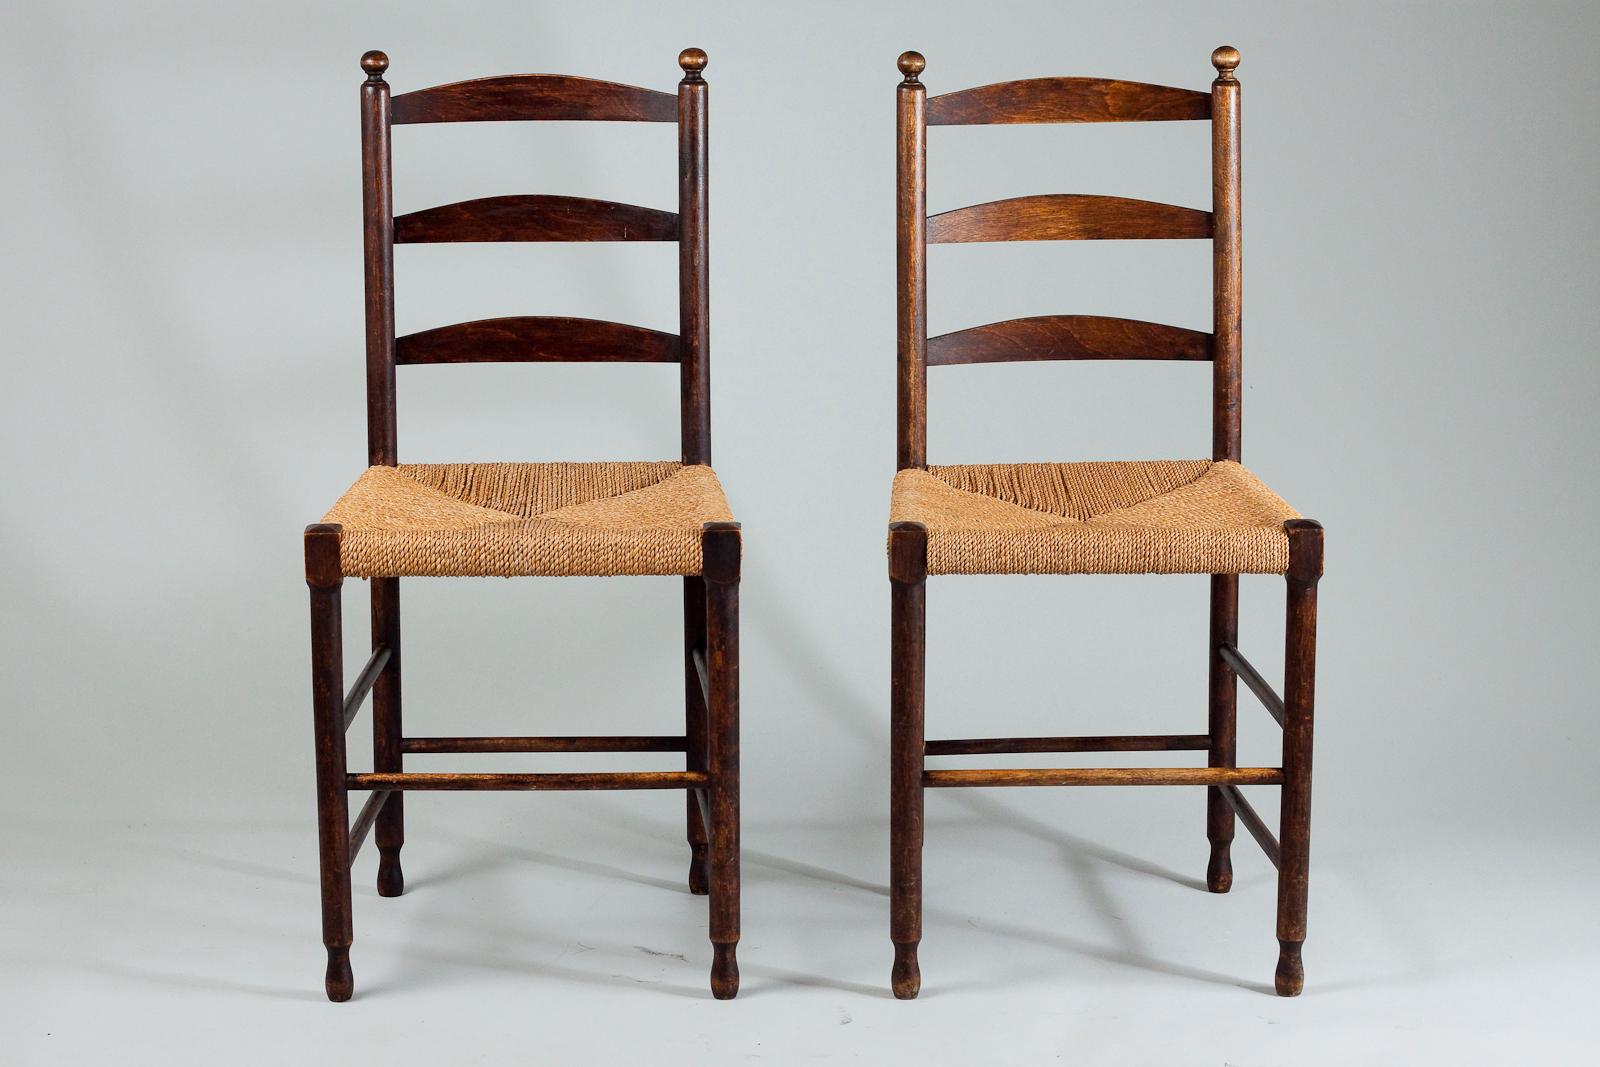 Pair of vintage Shaker style chairs with weaved rush seat and ladder style back.